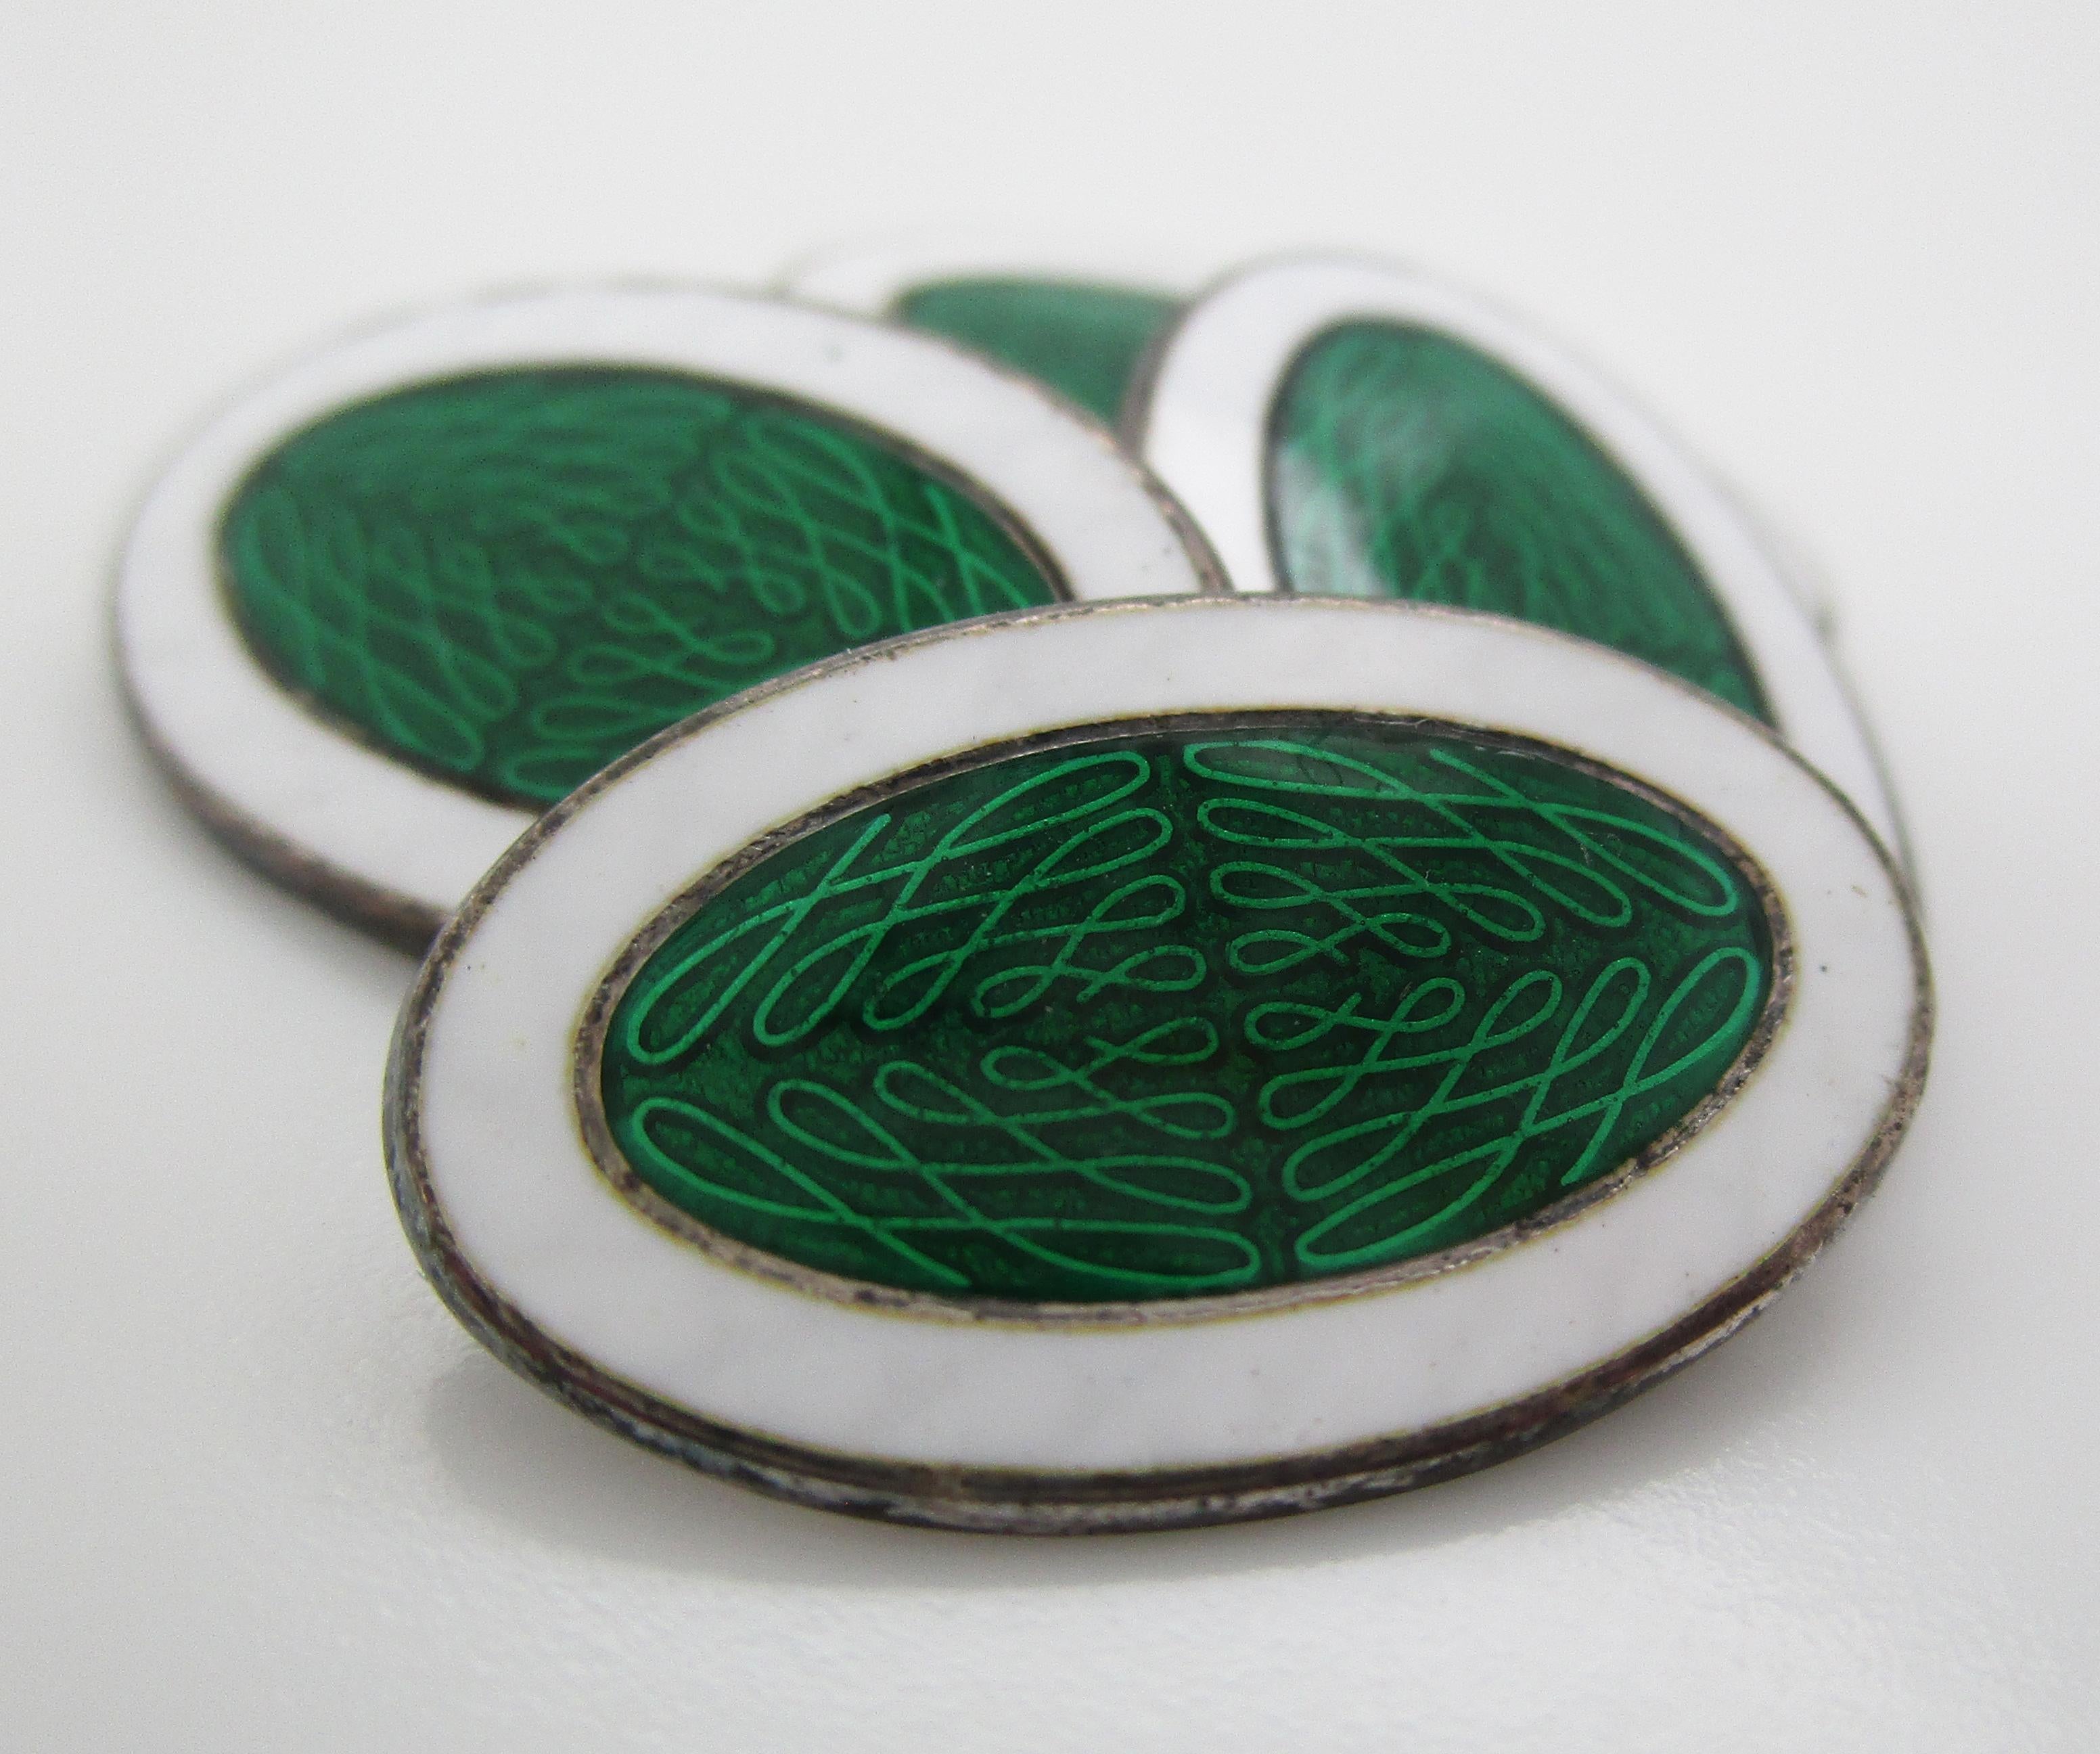 This is an excellent pair of suave Deco cufflinks in sterling silver with green and white enamel panels. The green center of the panels has great guilloche details and the white frame creates a strong terminus to an elegant link. The links have a